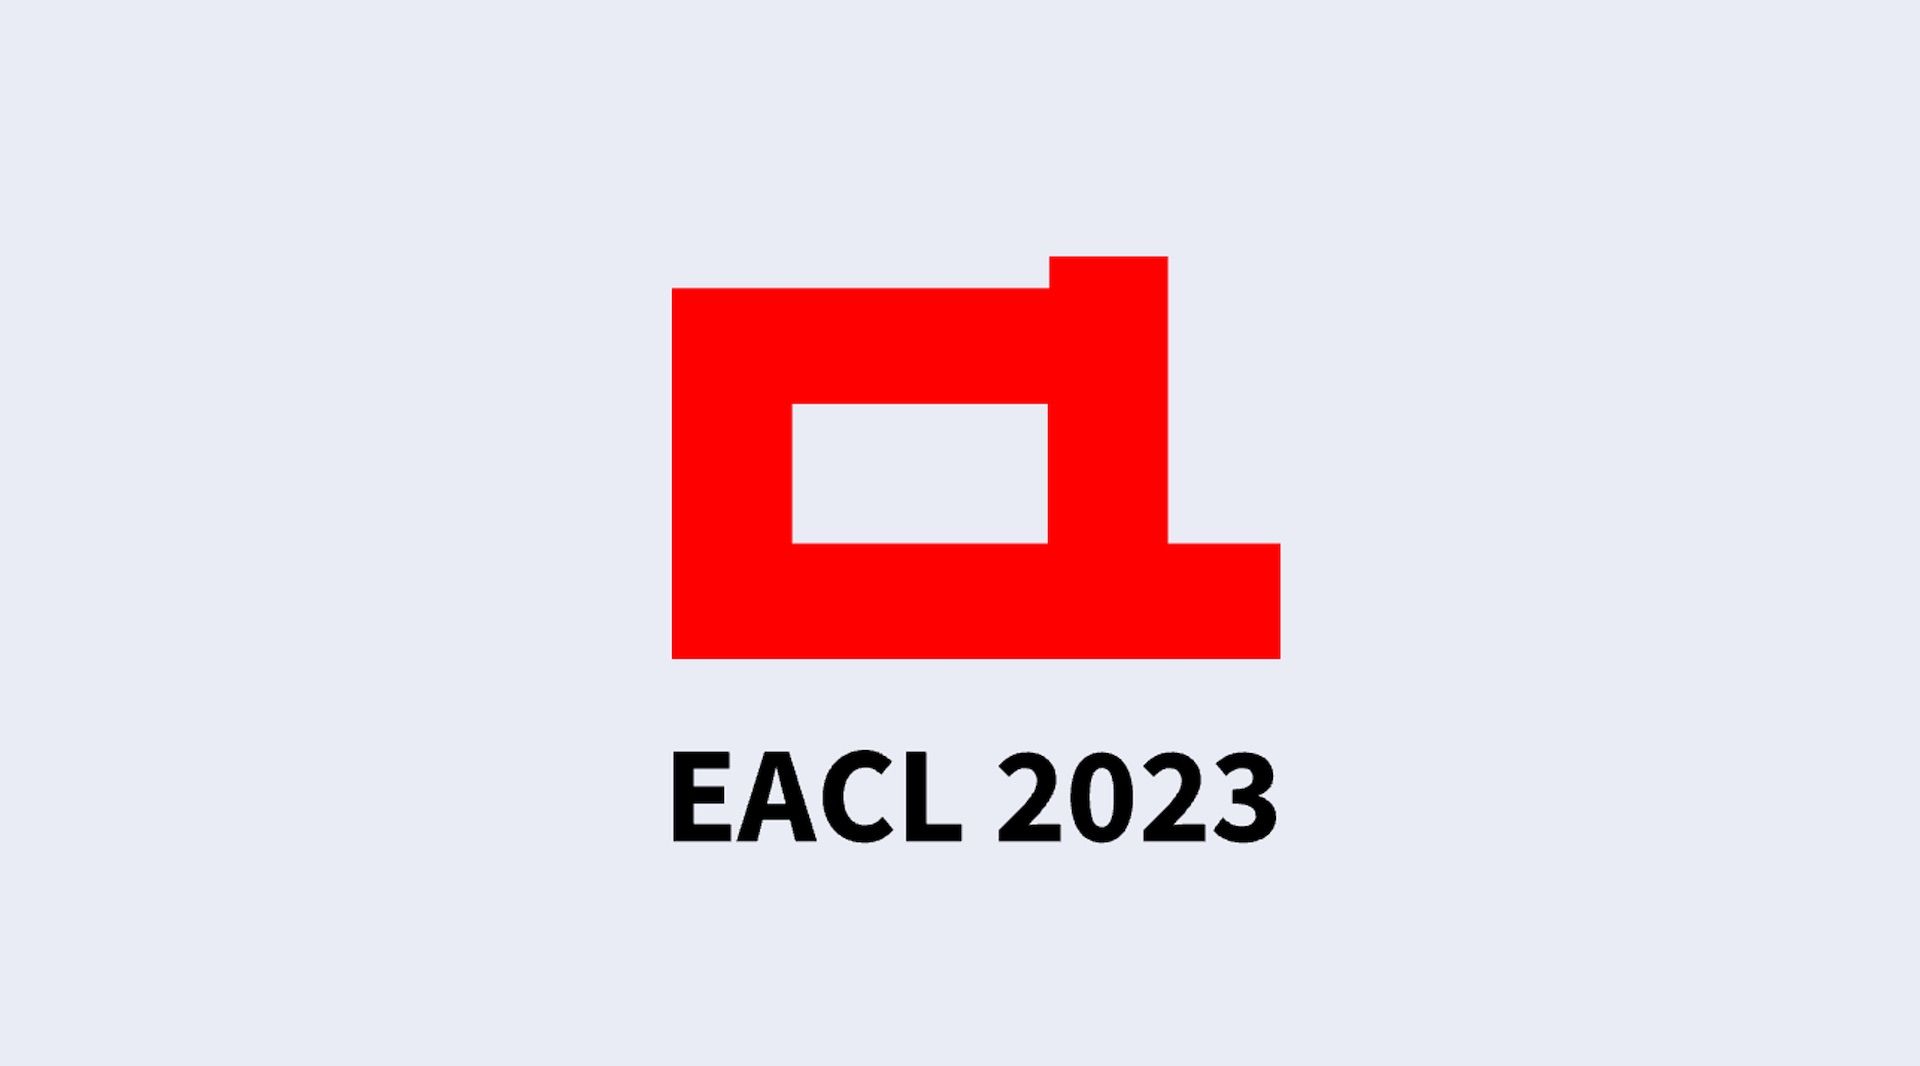 deepsense.ai among top European experts sharing NLP knowledge at the EACL conference 2023